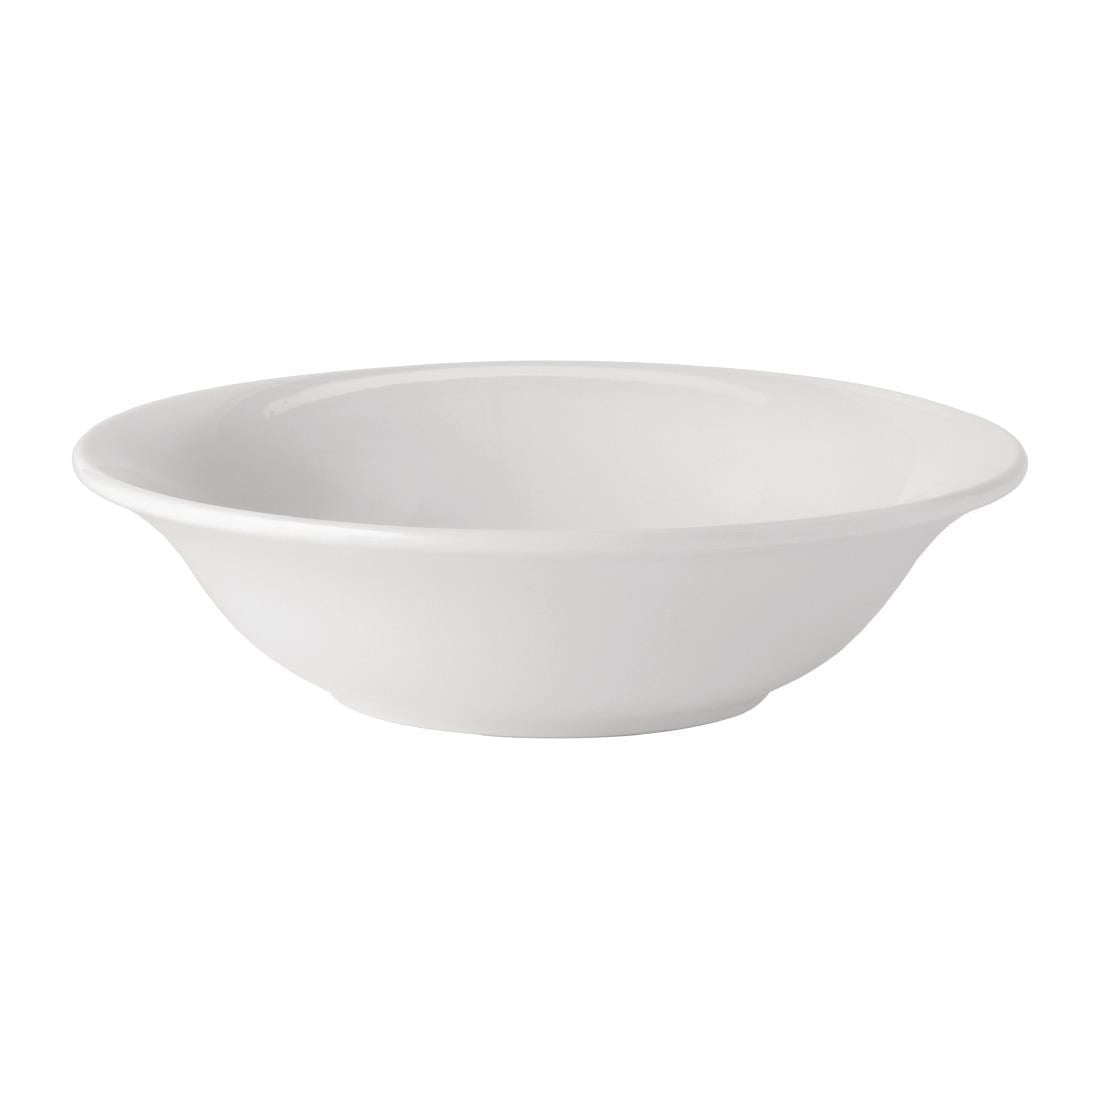 DY329 Utopia Pure White Oatmeal Bowls 150mm (Pack of 24)